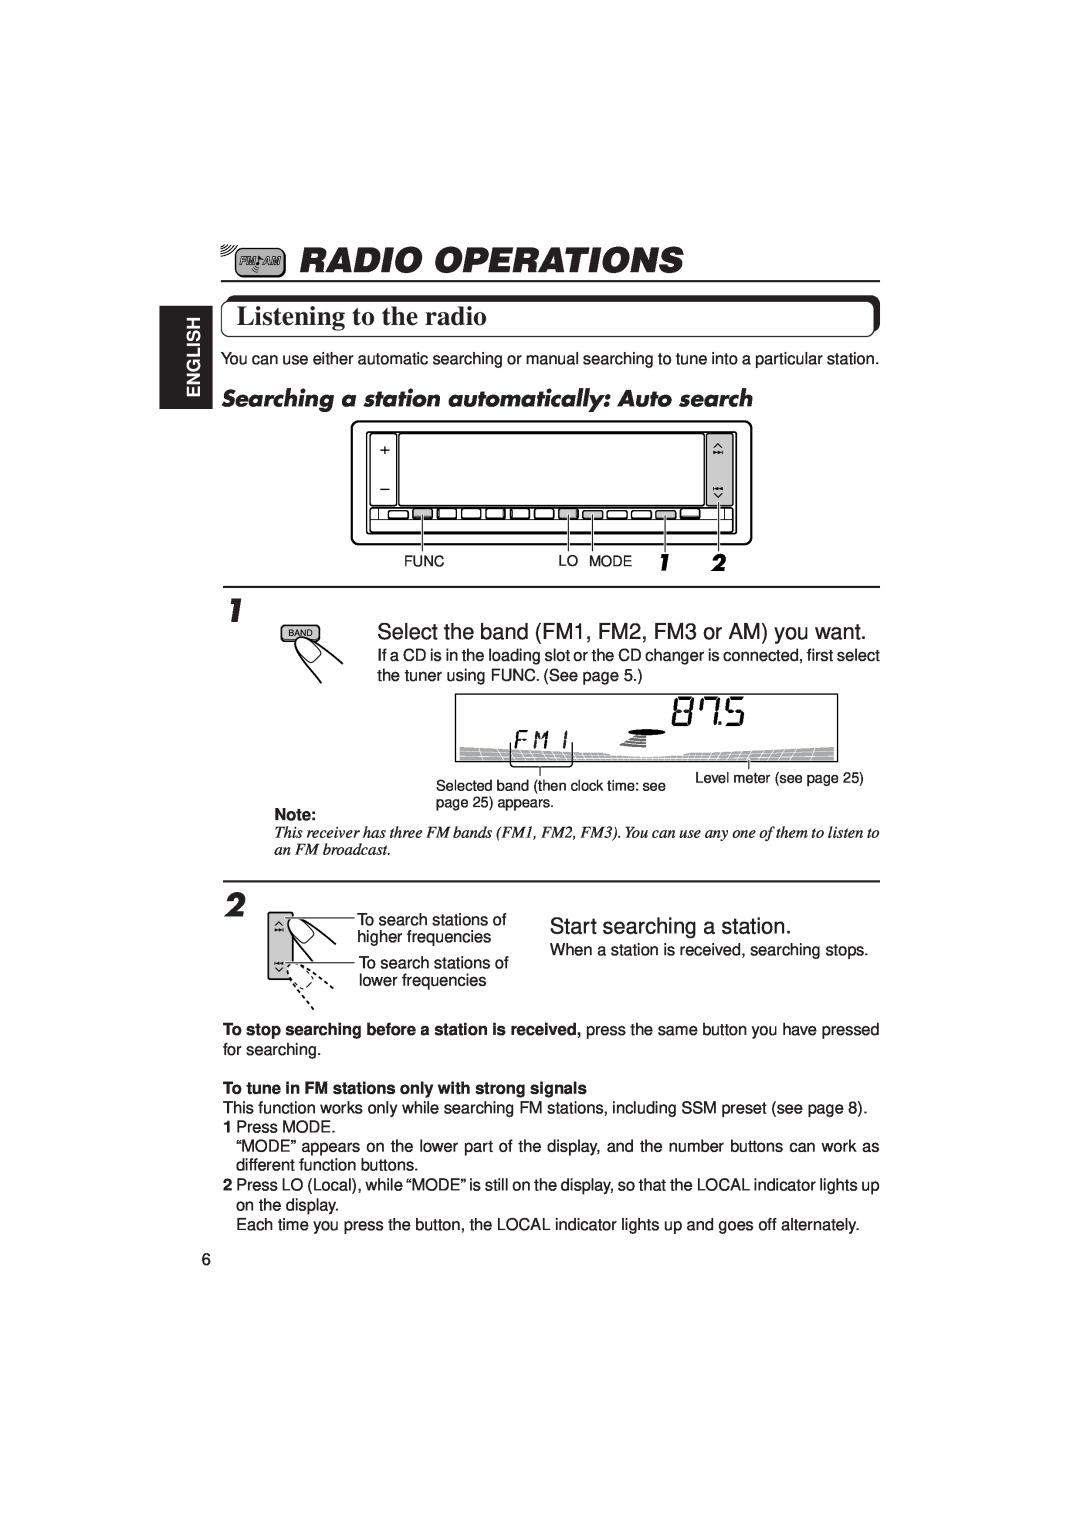 JVC KD-LX1 manual Radio Operations, Listening to the radio, Searching a station automatically Auto search, English 